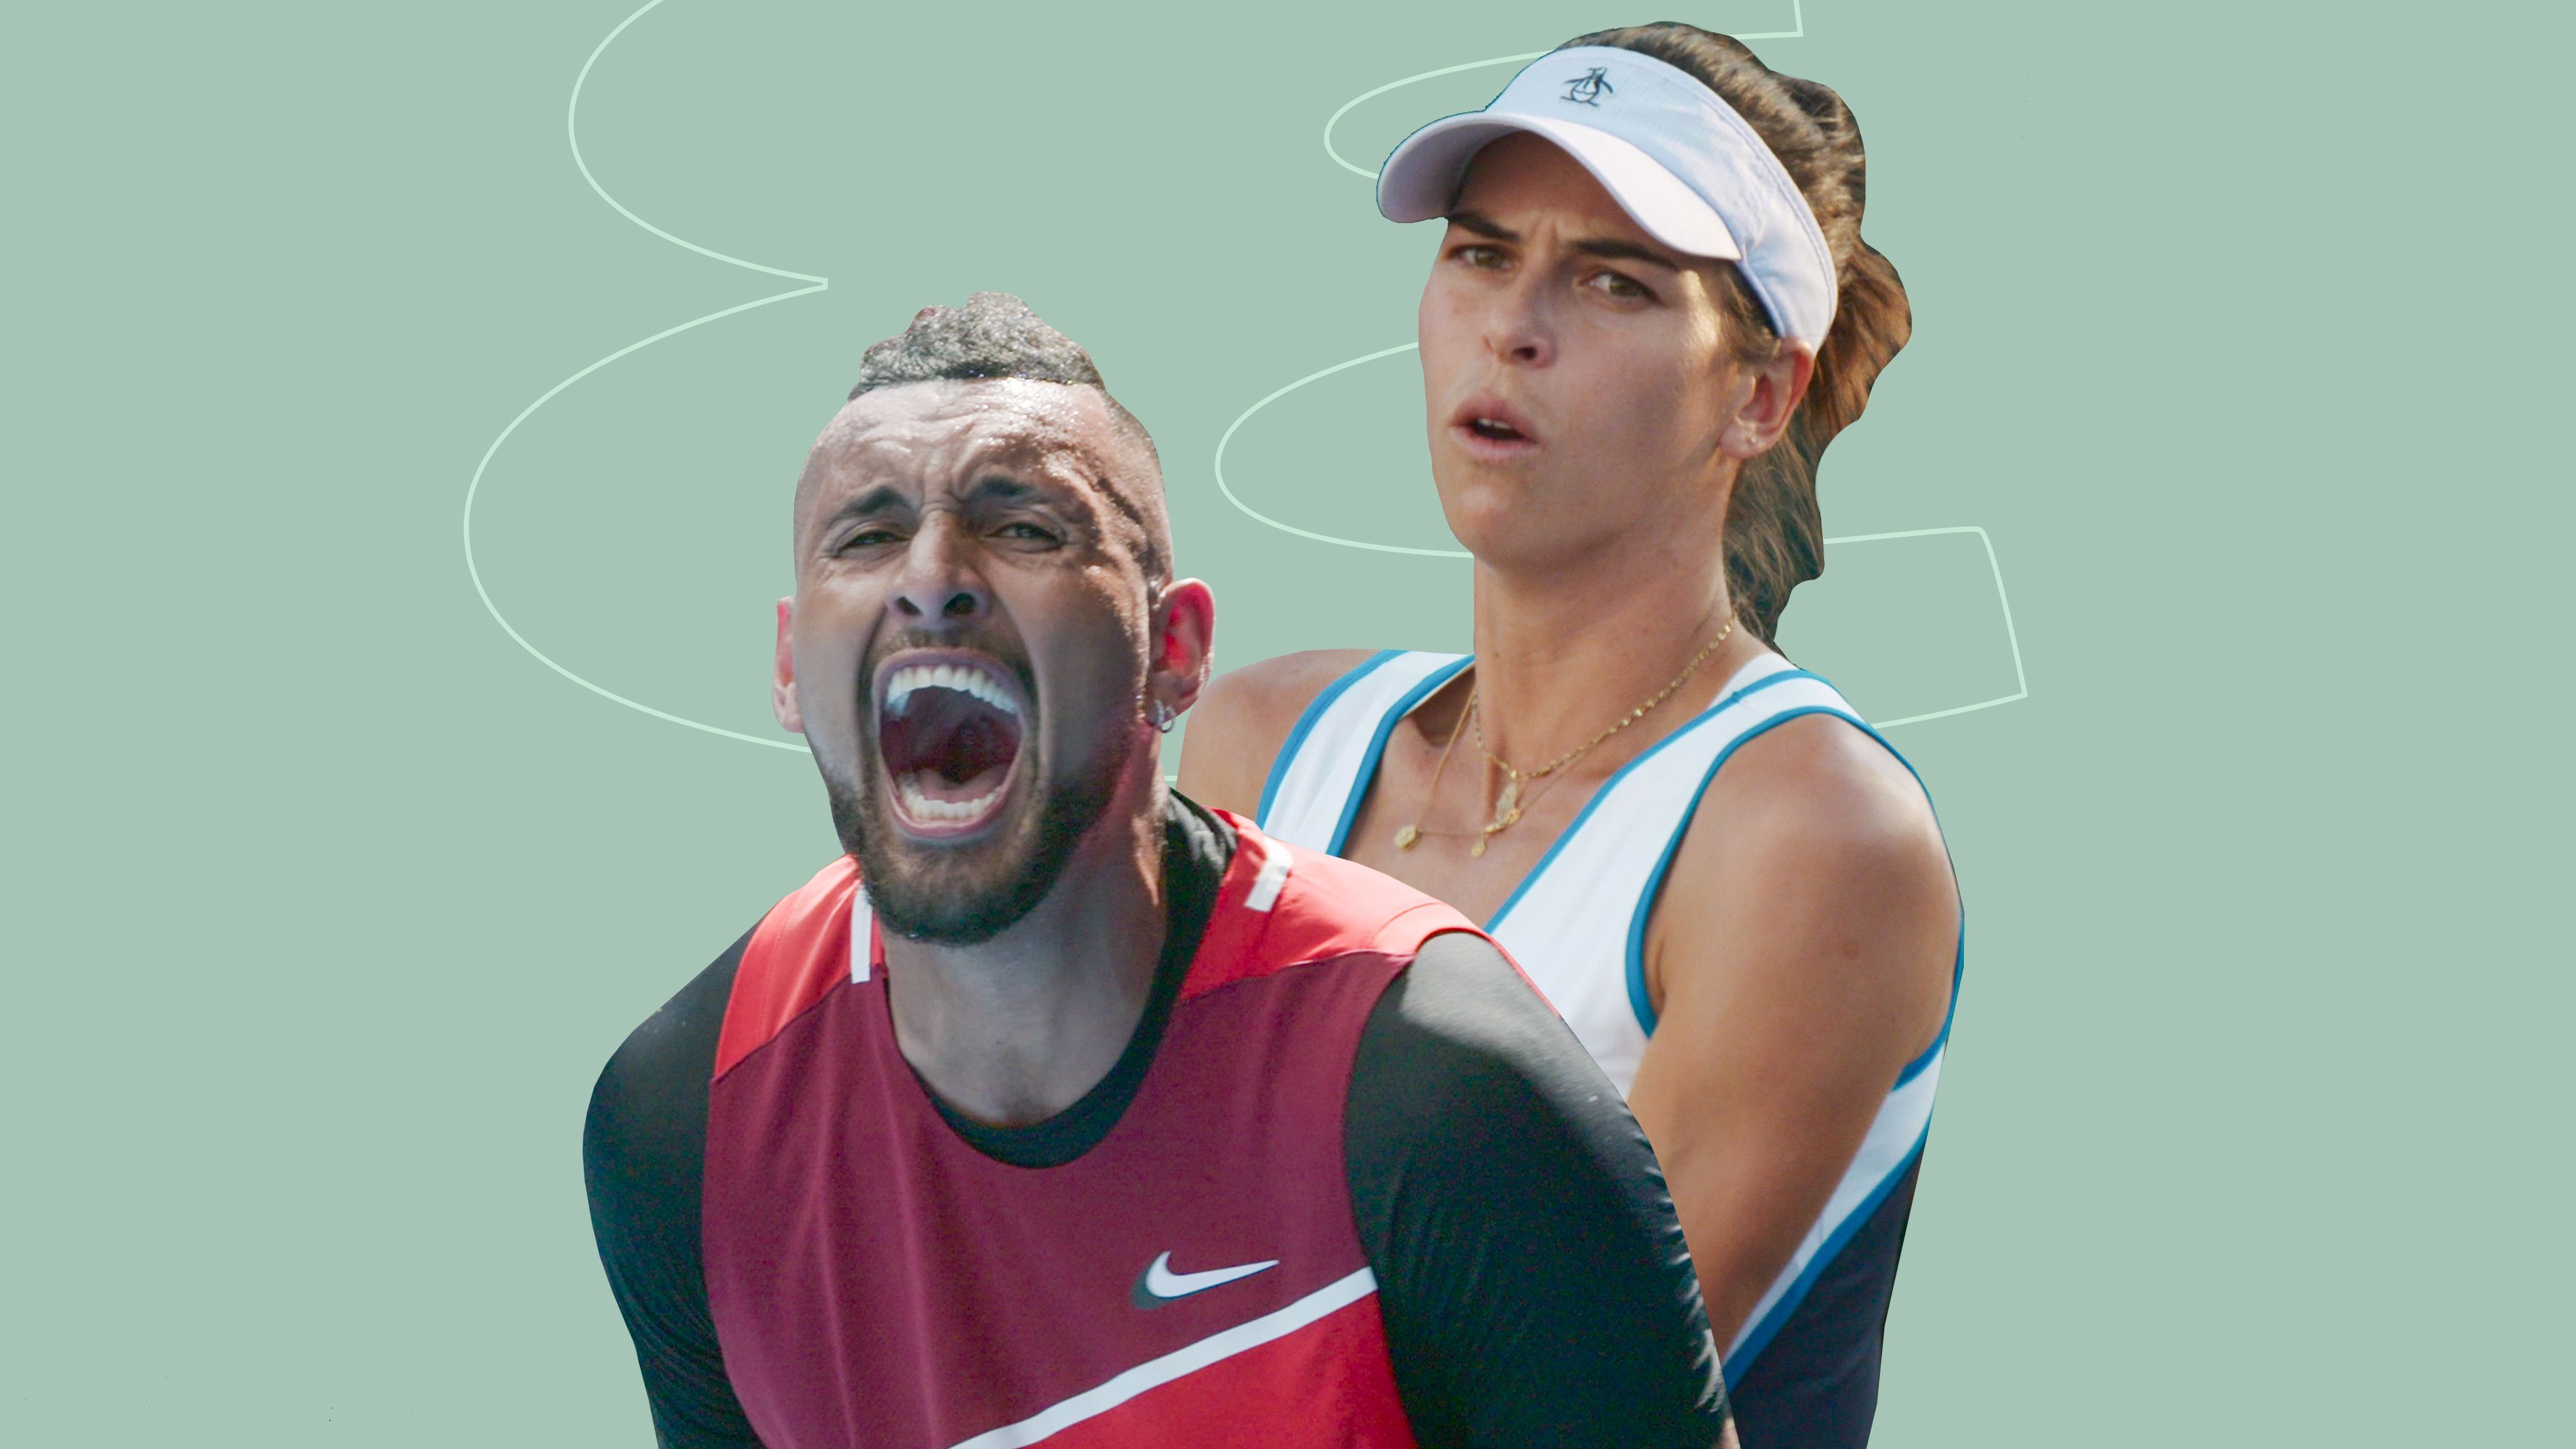 Tennis Docuseries 'Break Point' Part 1 Coming to Netflix in January 2023 -  What's on Netflix